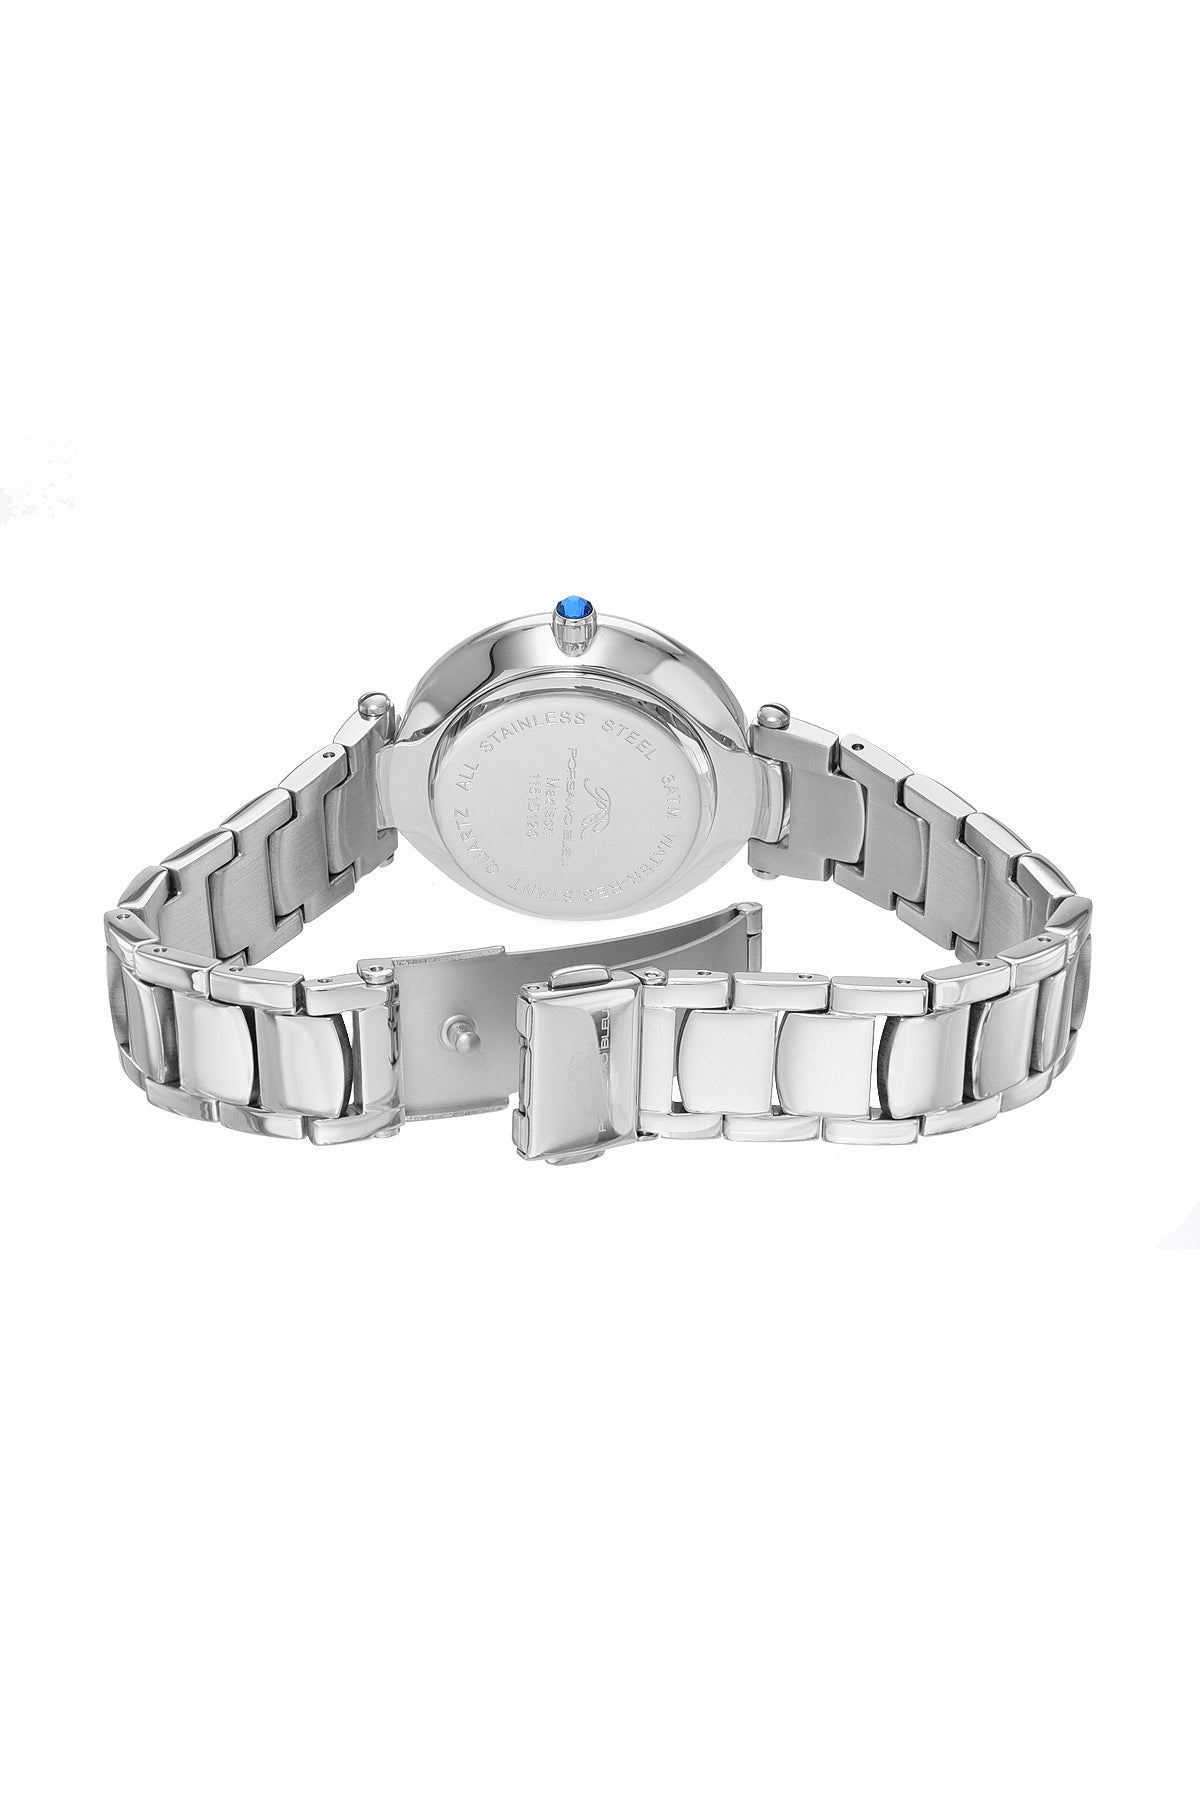 Porsamo Bleu Madison Luxury Women's Stainless Steel Watch, Silver With Turquoise Guilloche Dial 1151DMAS